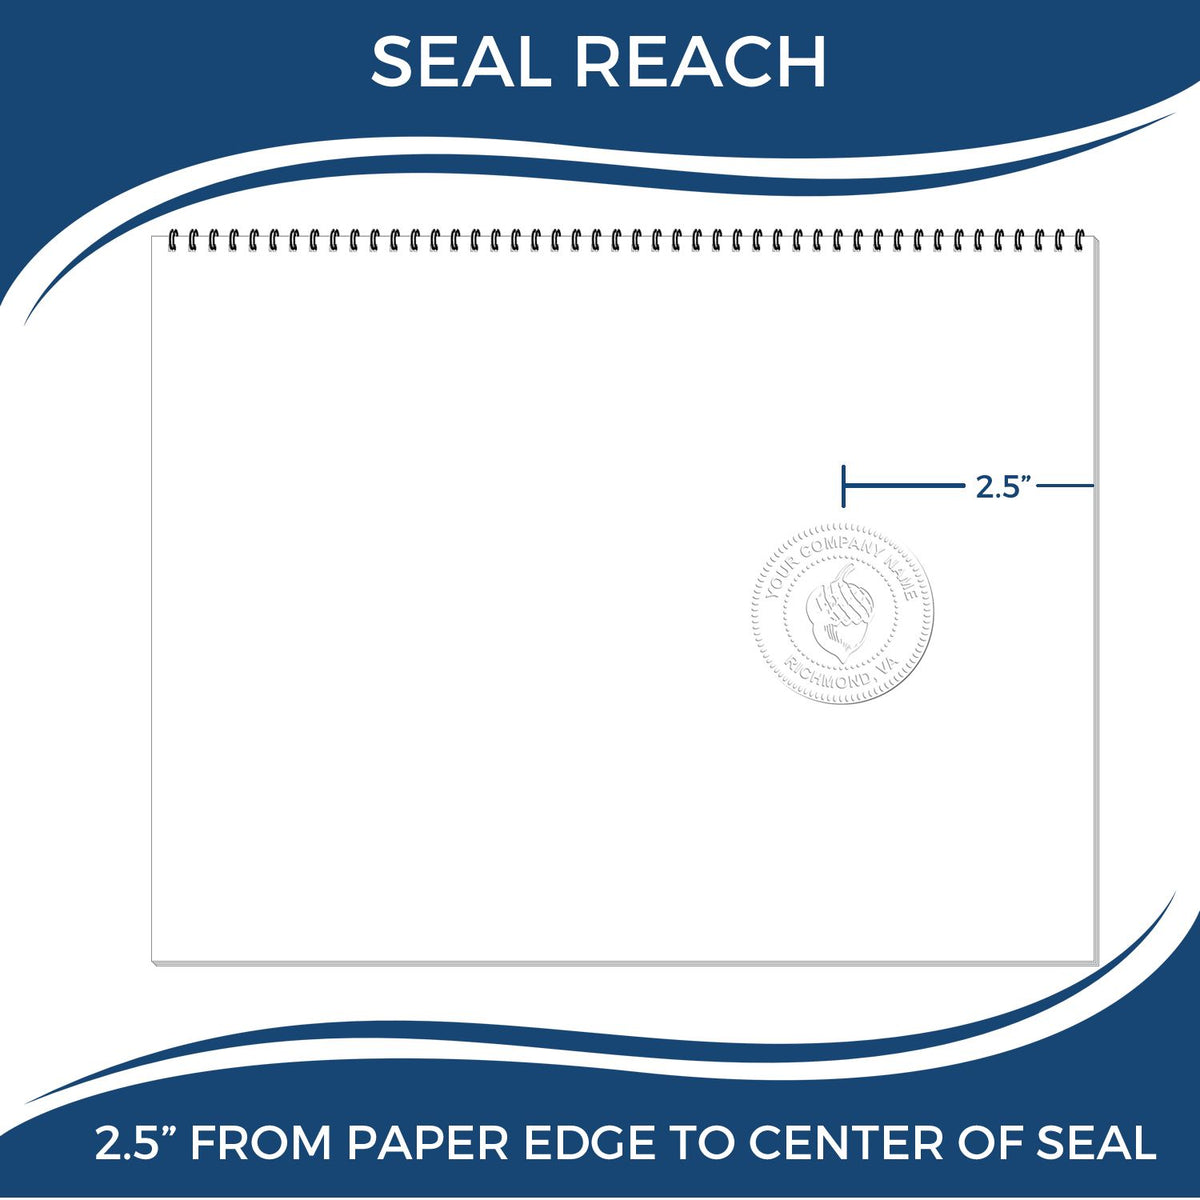 An infographic showing the seal reach which is represented by a ruler and a miniature seal image of the Heavy Duty Cast Iron South Dakota Engineer Seal Embosser